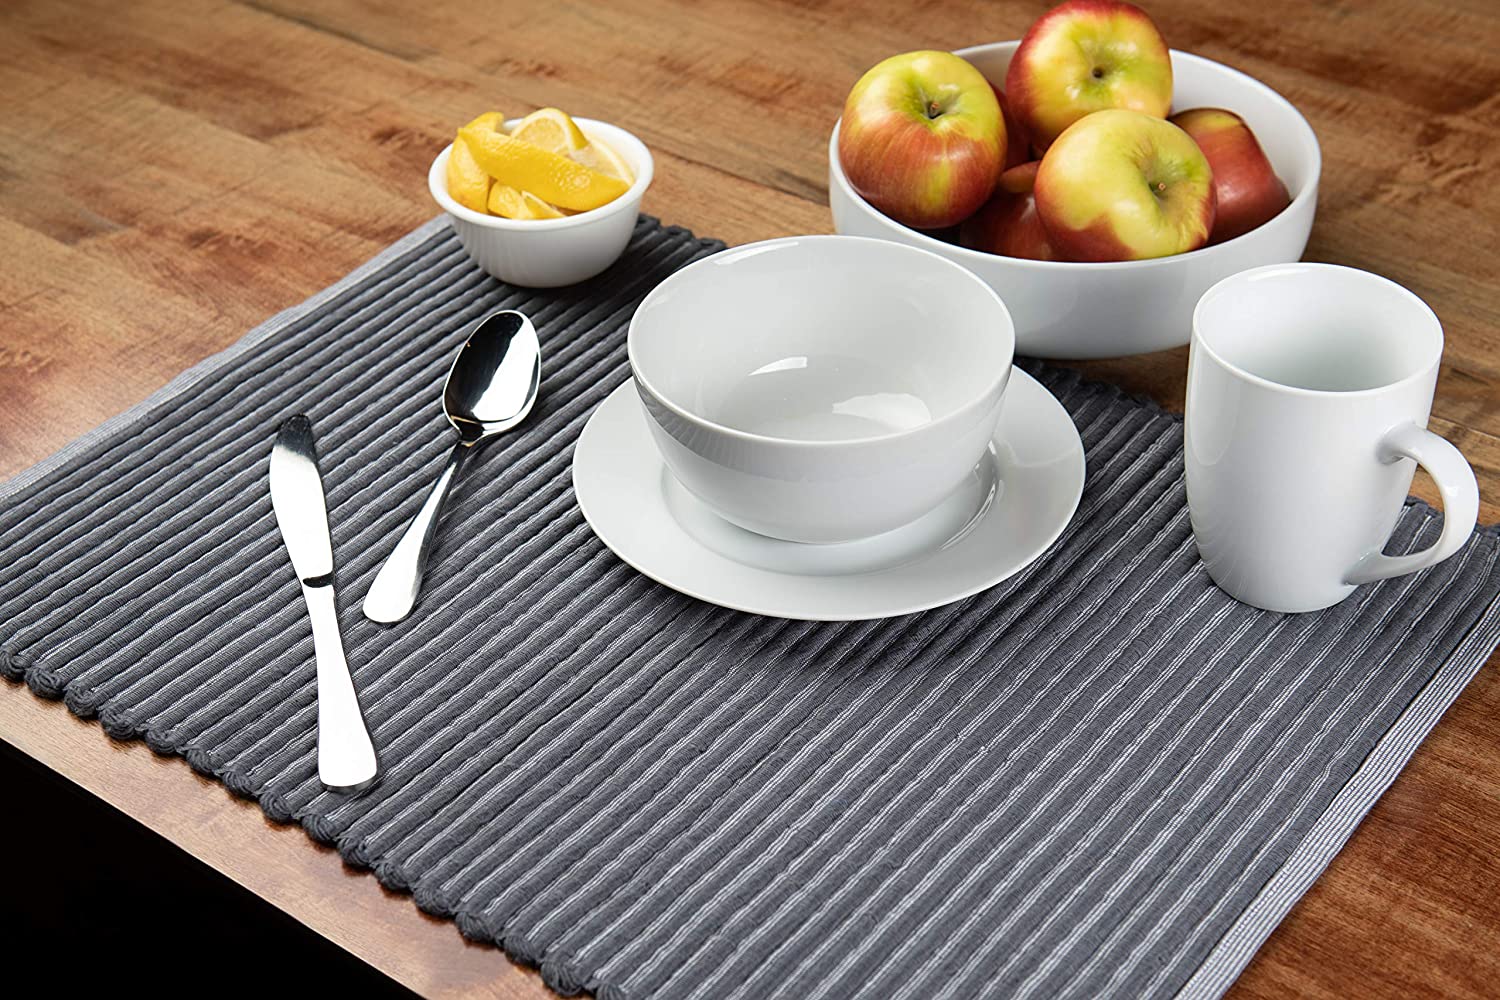 PIGCHCY Elegant Placemats with Matching Table Runner,Durable Cleaning  Placemats for Dining Table Sets(6pcs Placemats+1pcs Table Runner, Chocolate